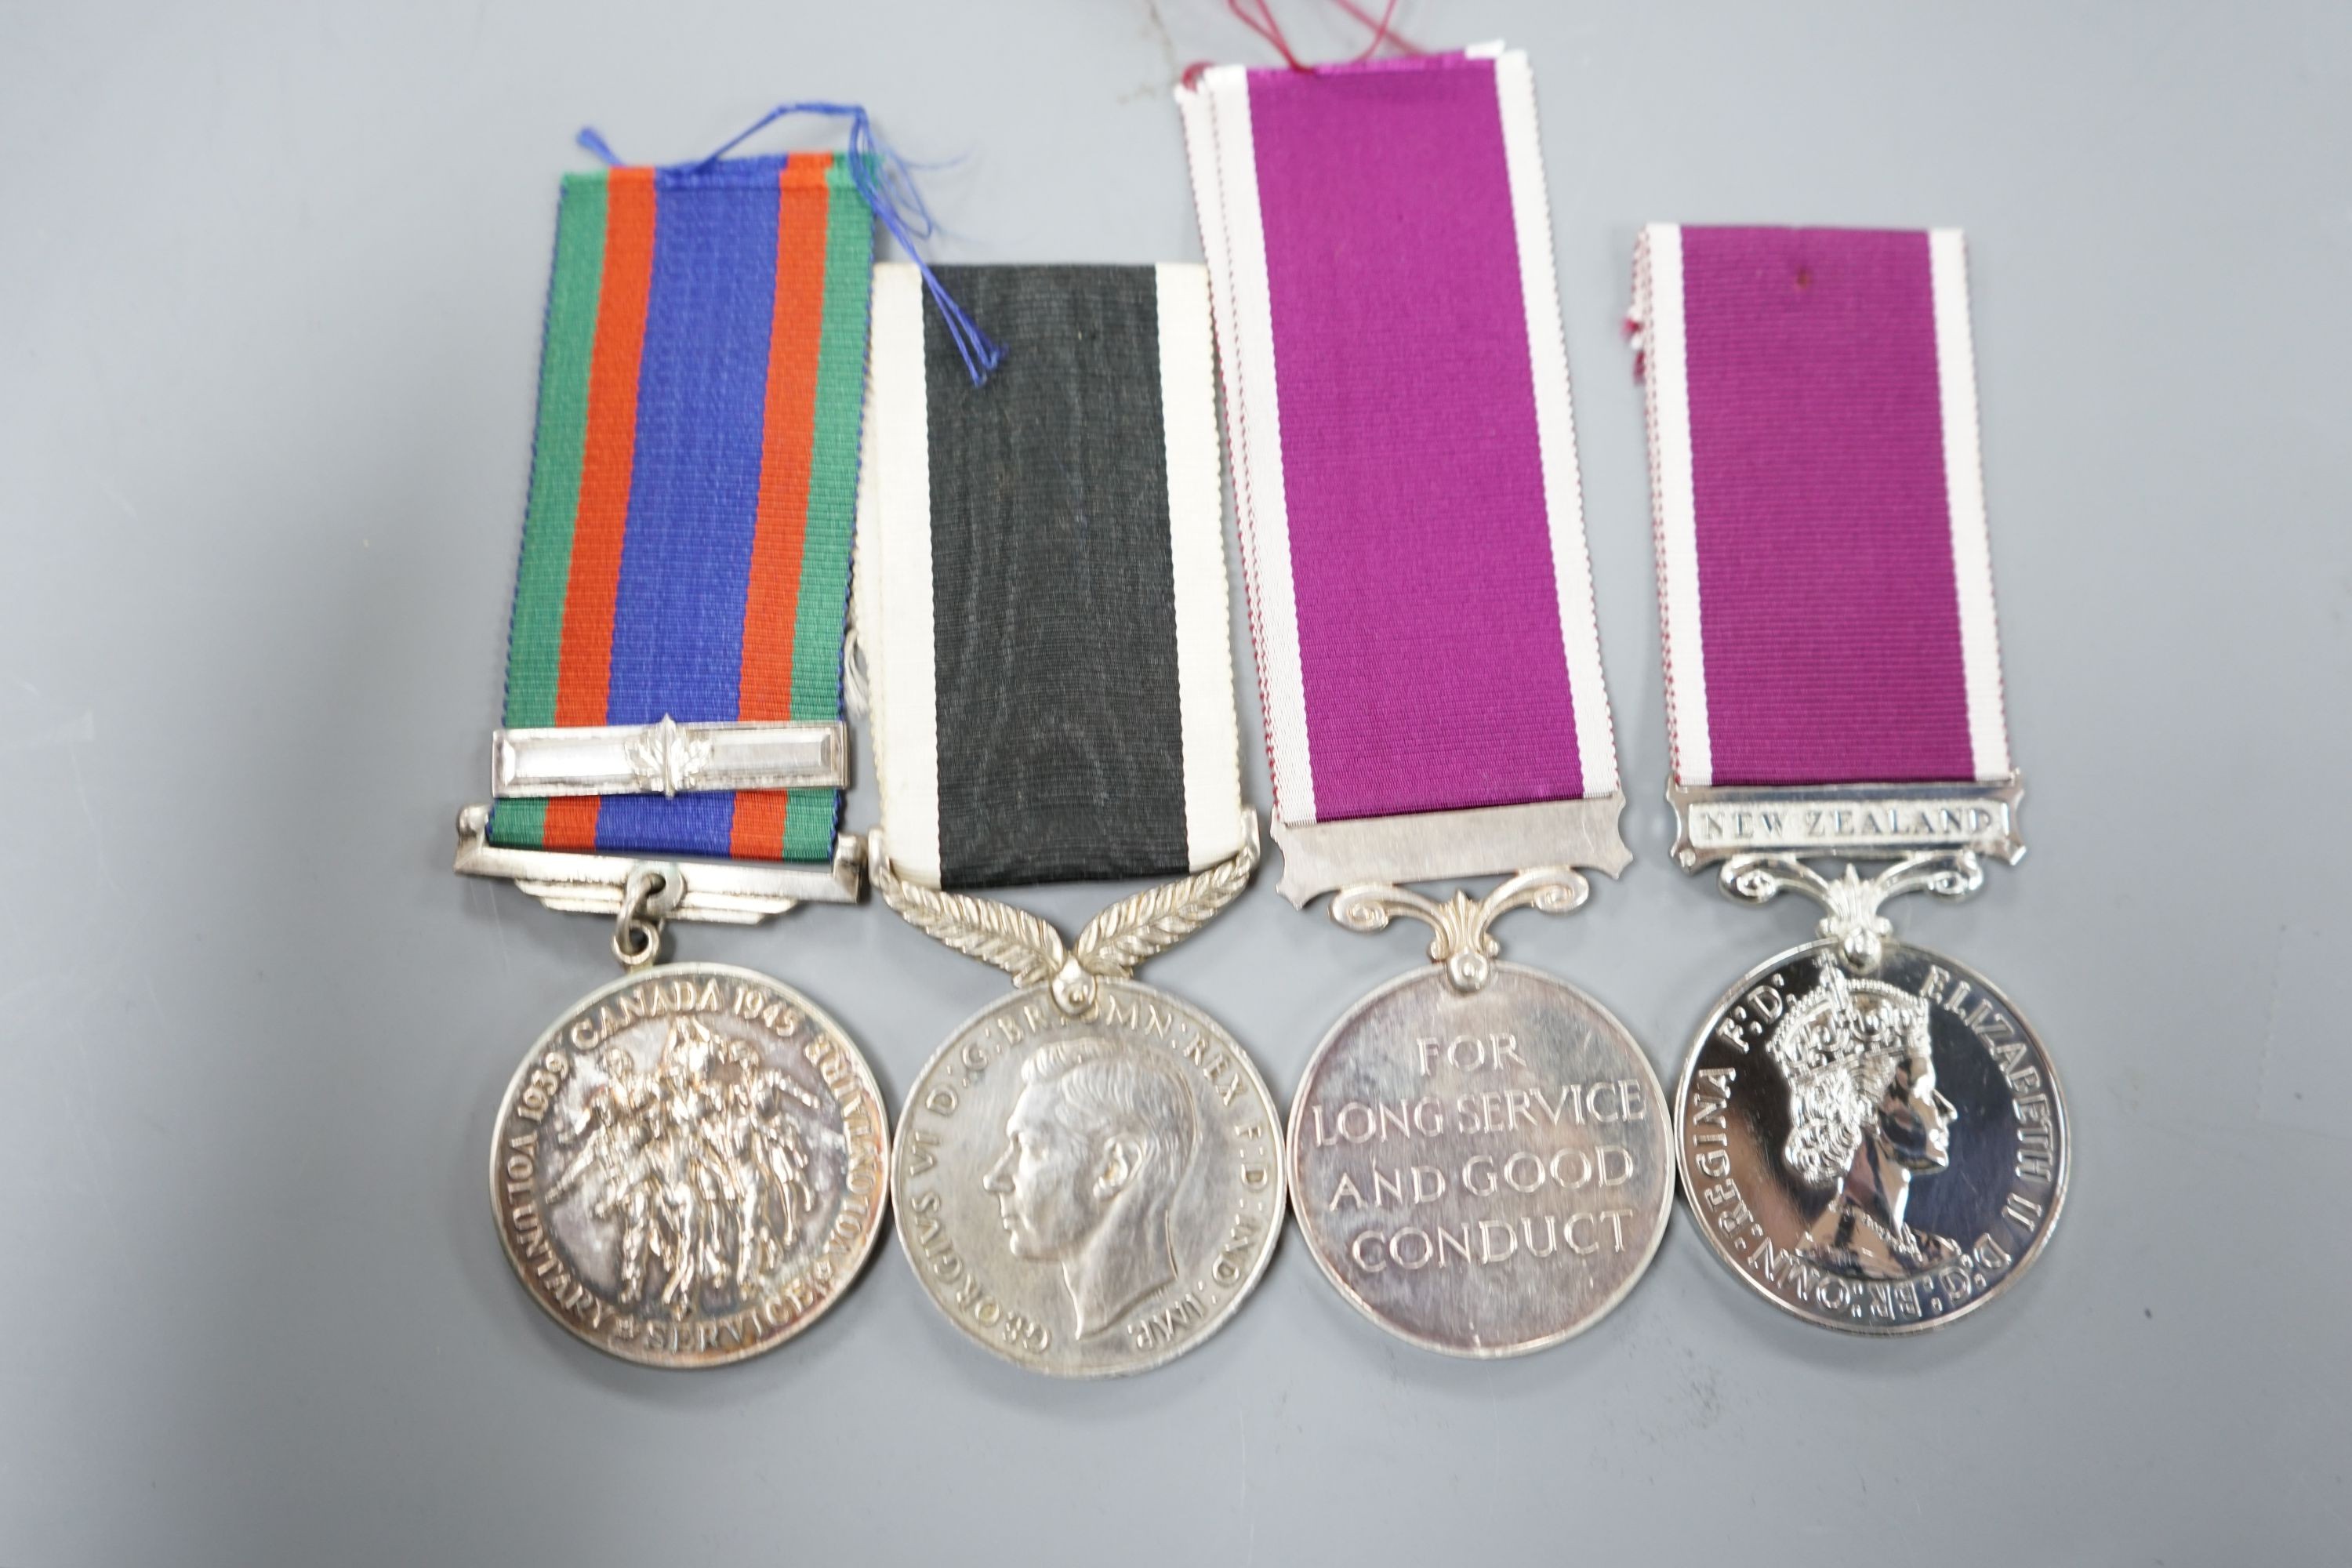 Four WW2 and QEII Commonwealth medals - New Zealand War Service and For Long Service and Good Conduct medals, Canada Voluntary Service medal and a Regular Army For Long Service and Good Conduct medal